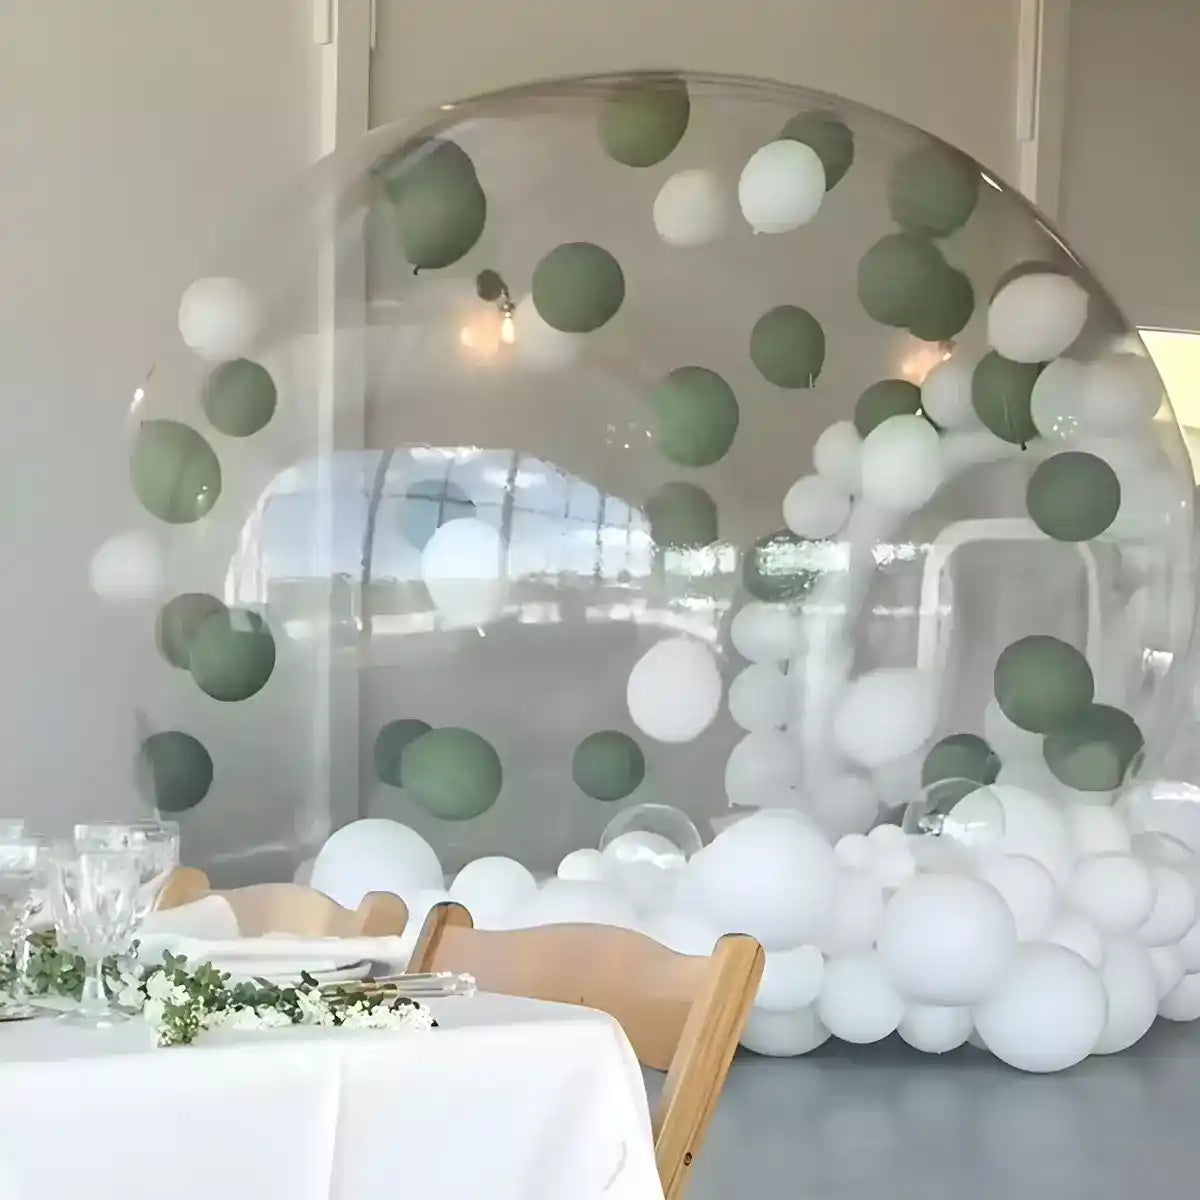 Bubble House decorated with sophisticated green and white balloons for wedding events